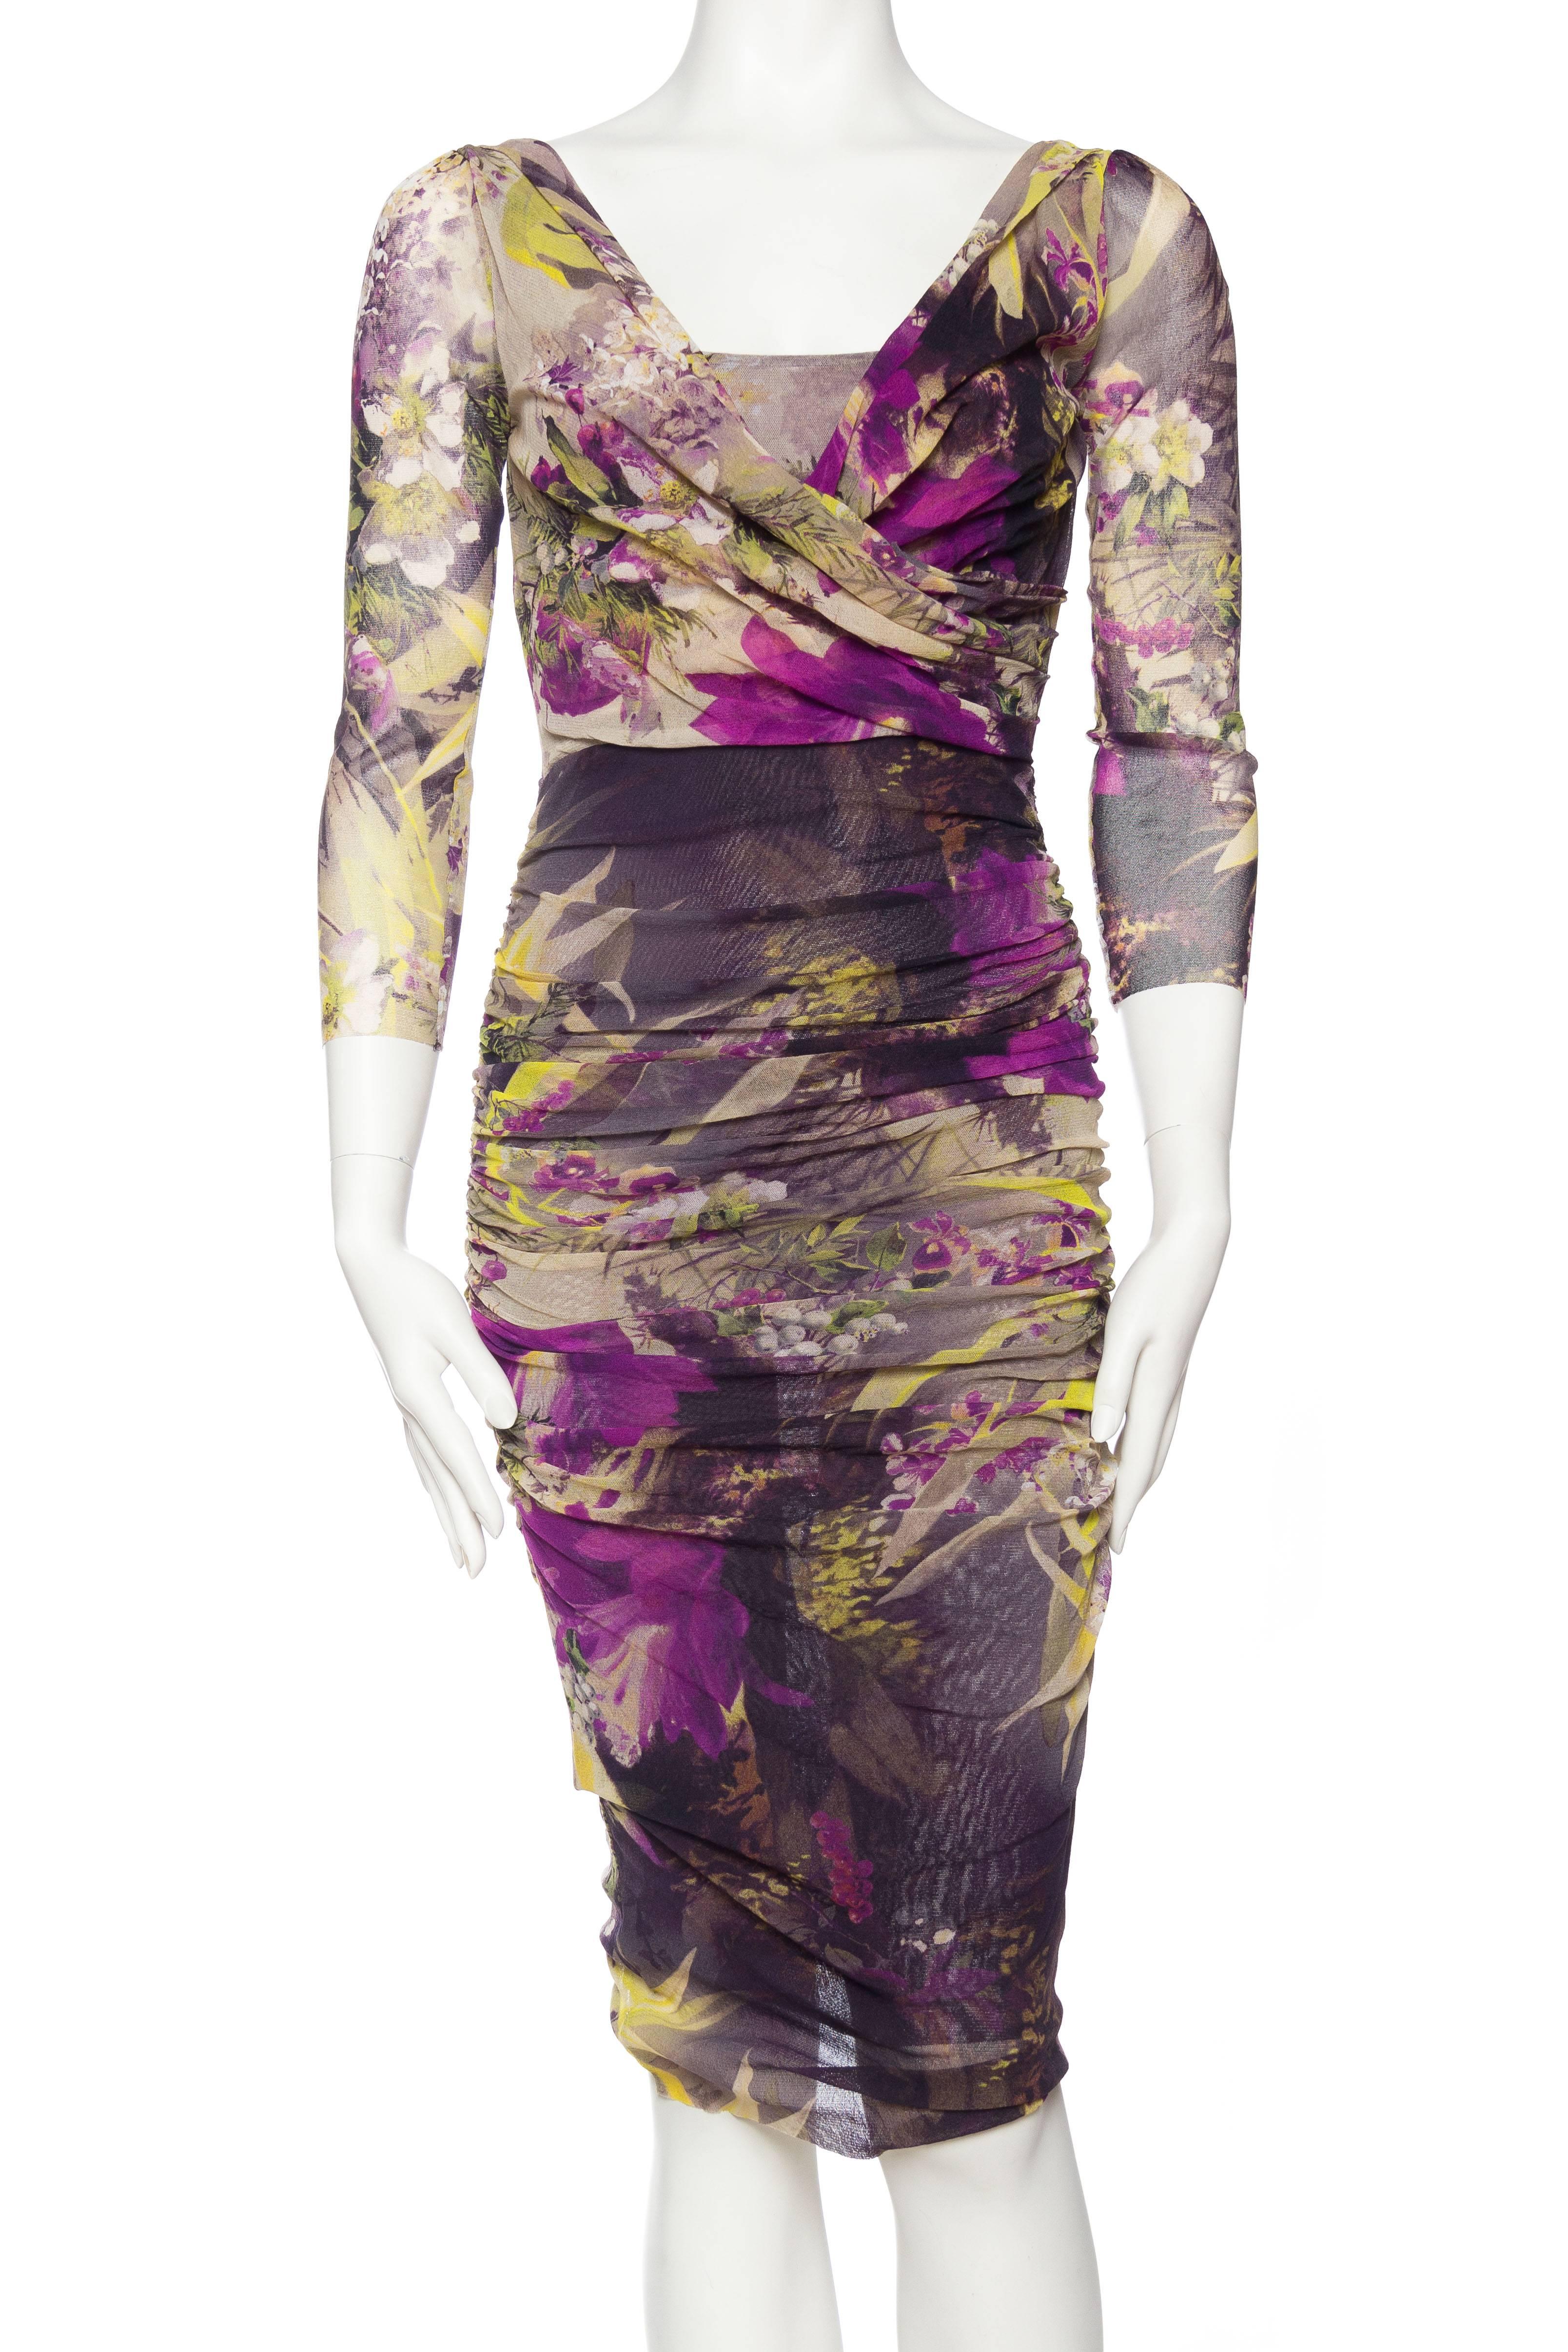 Gray Jean Paul Gaultier Abstract Floral Body-con Dress